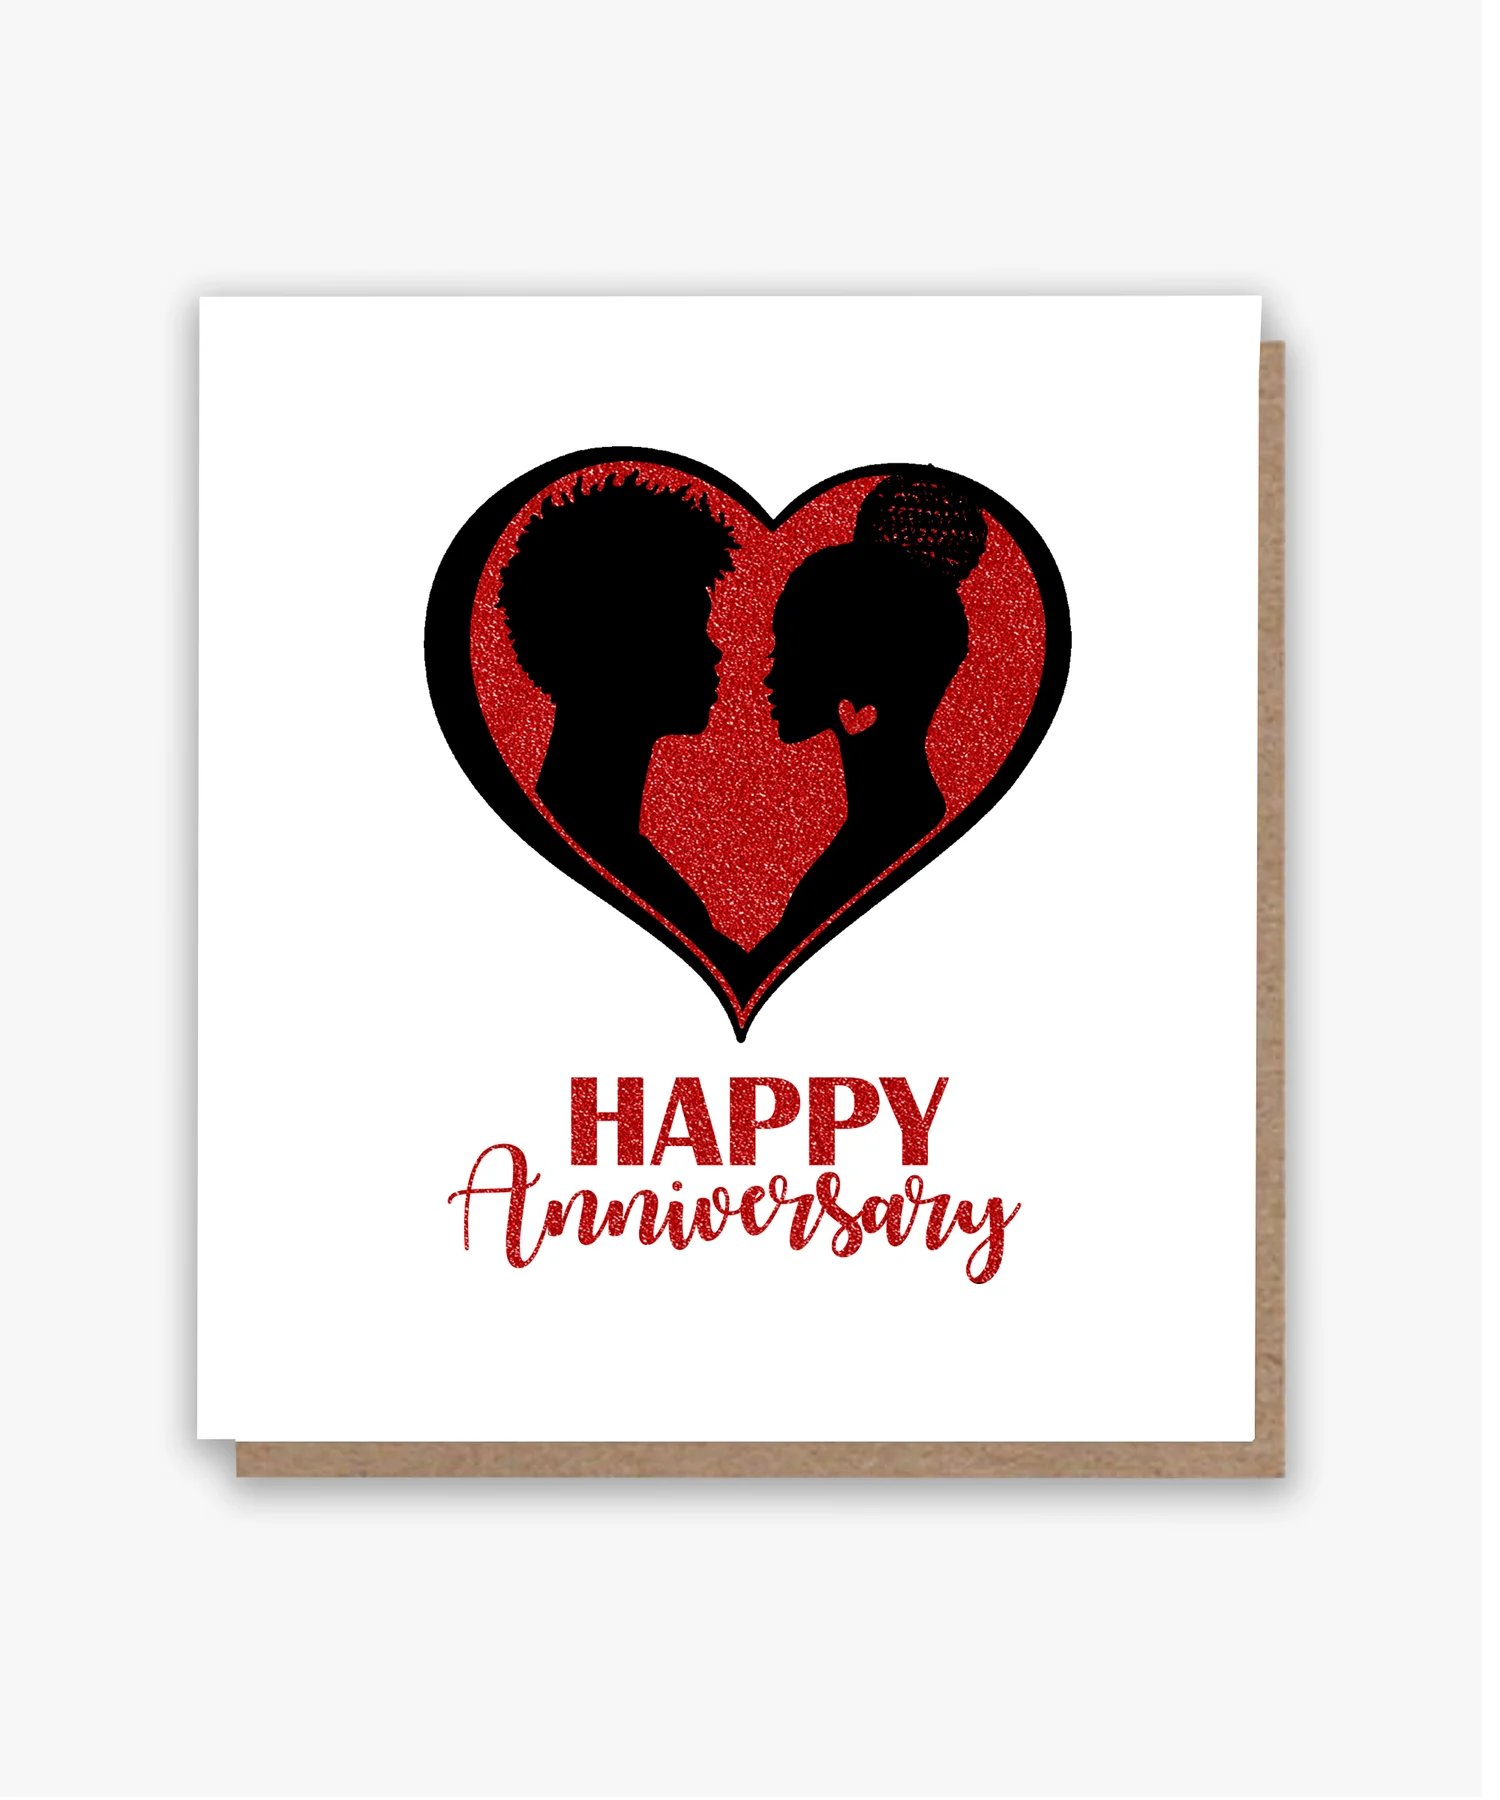 On Our Anniversary Card